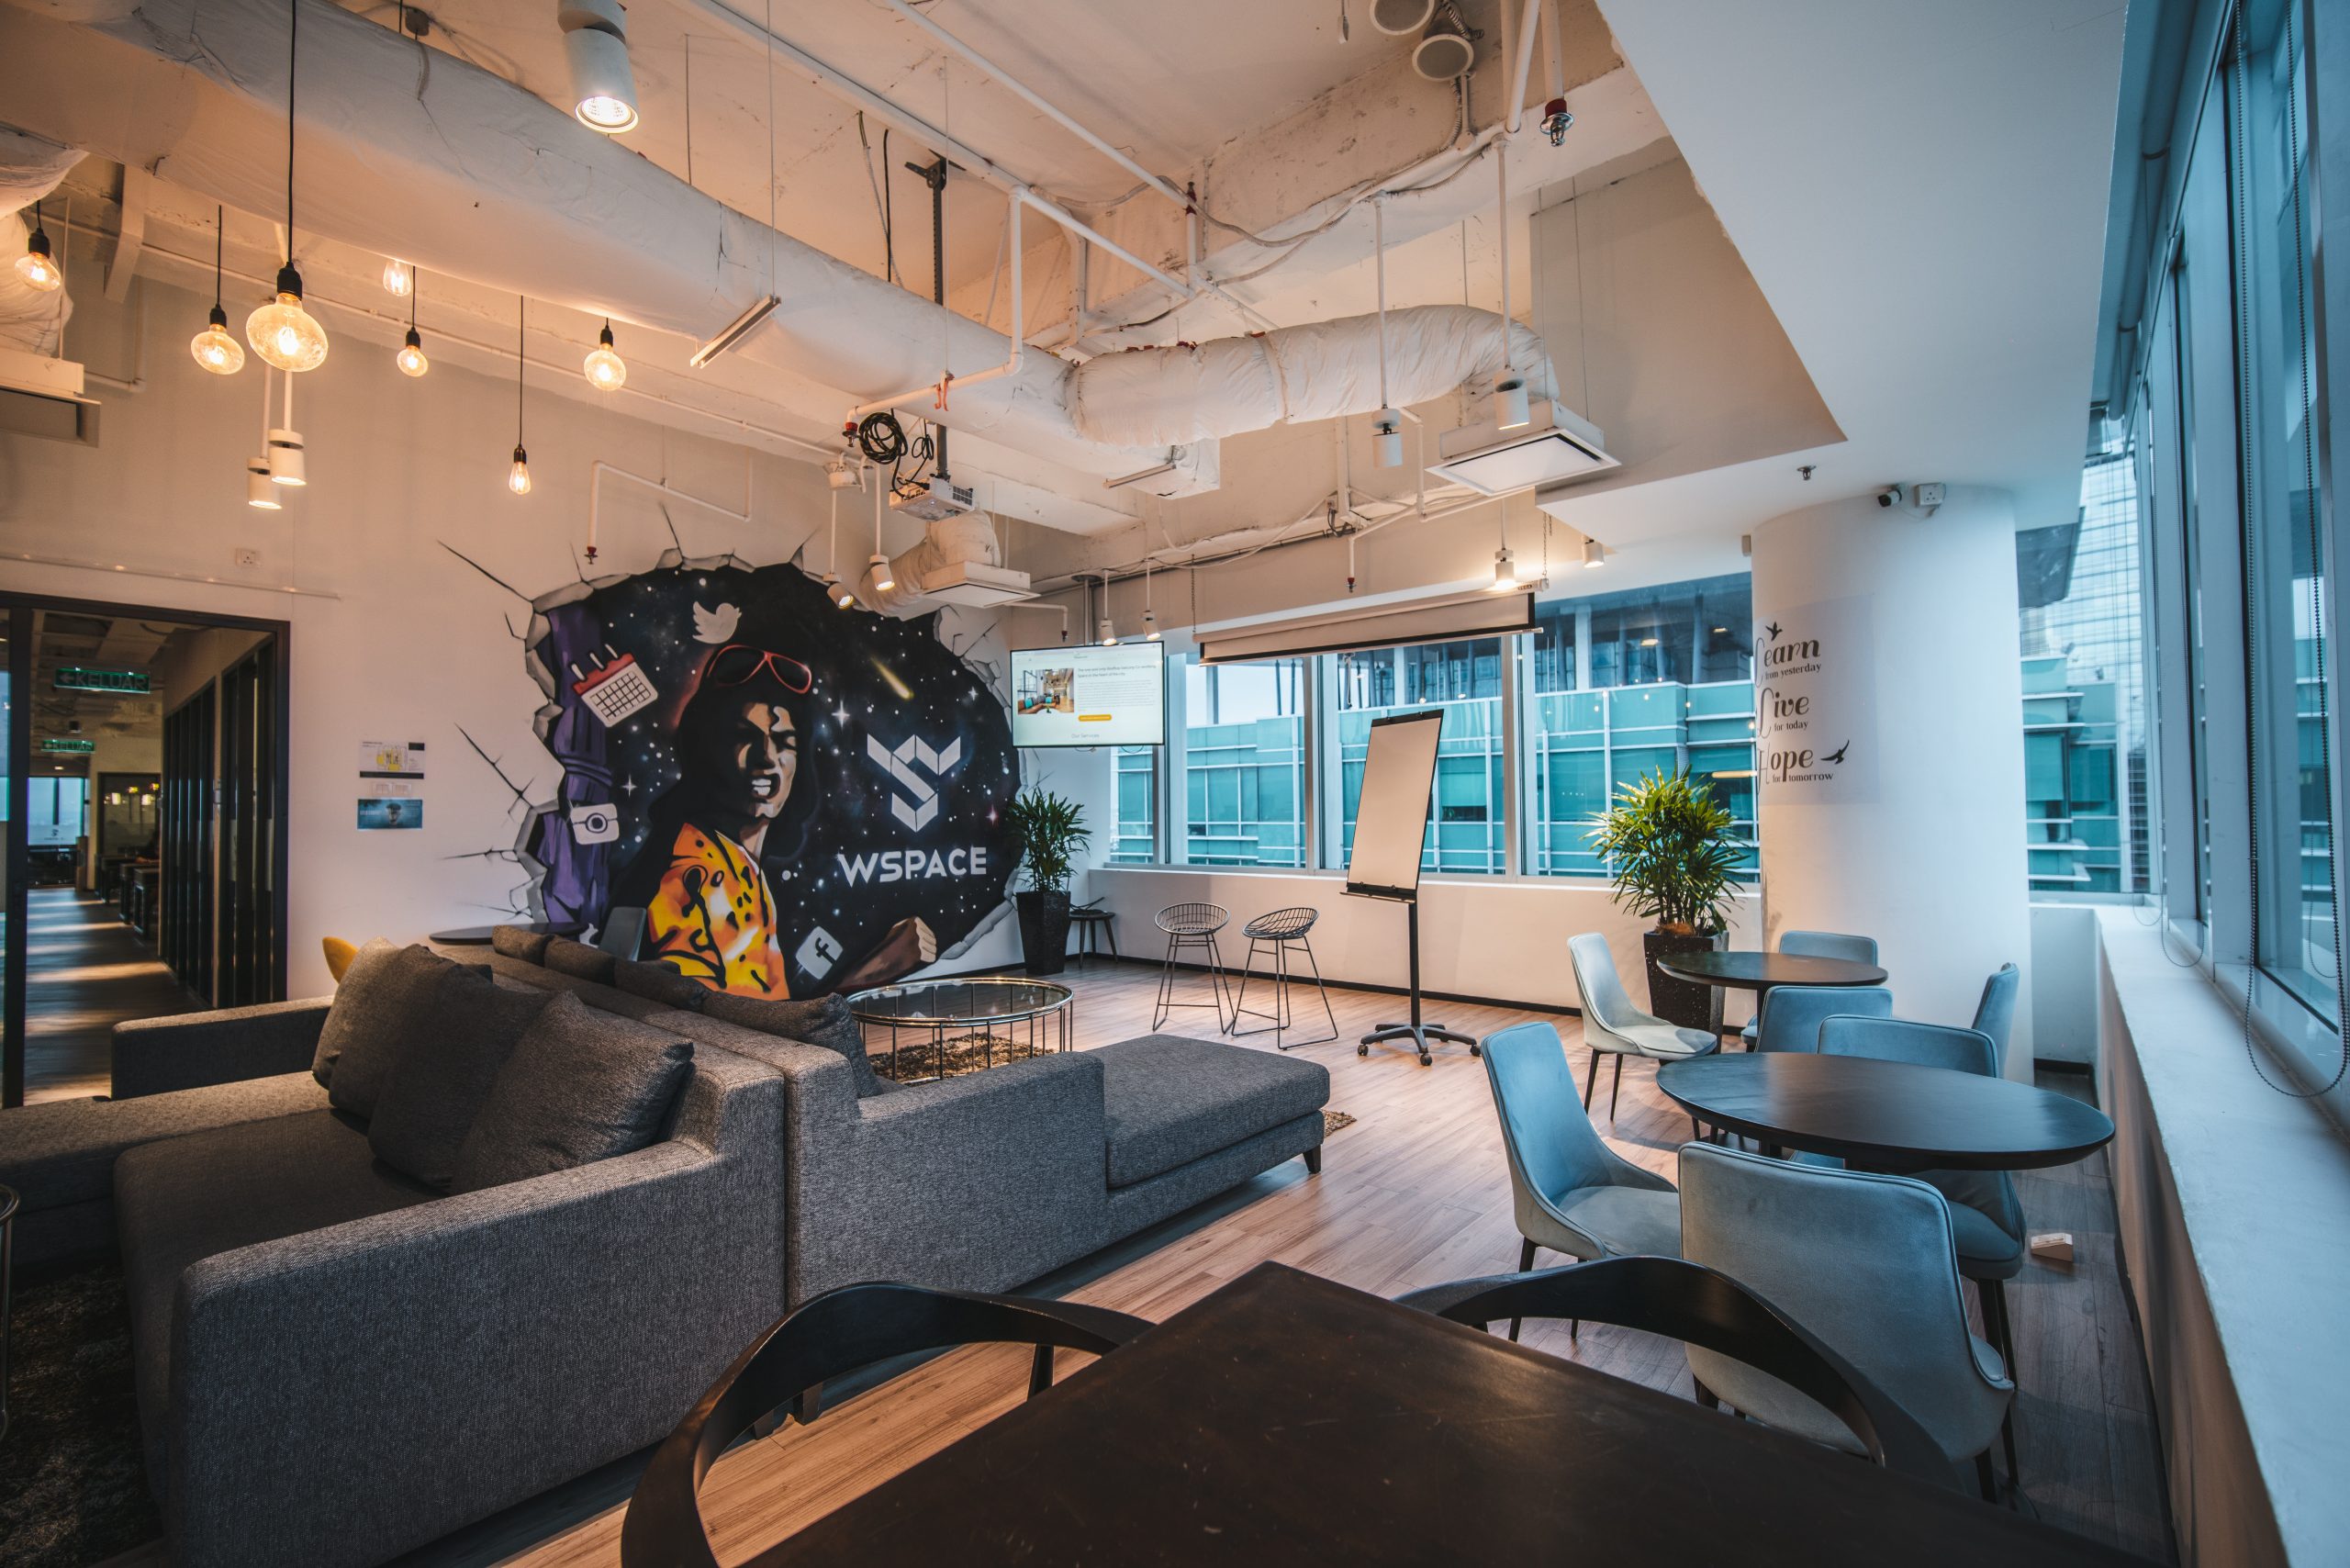 MV event space scaled – Getting an office in Kuala Lumpur